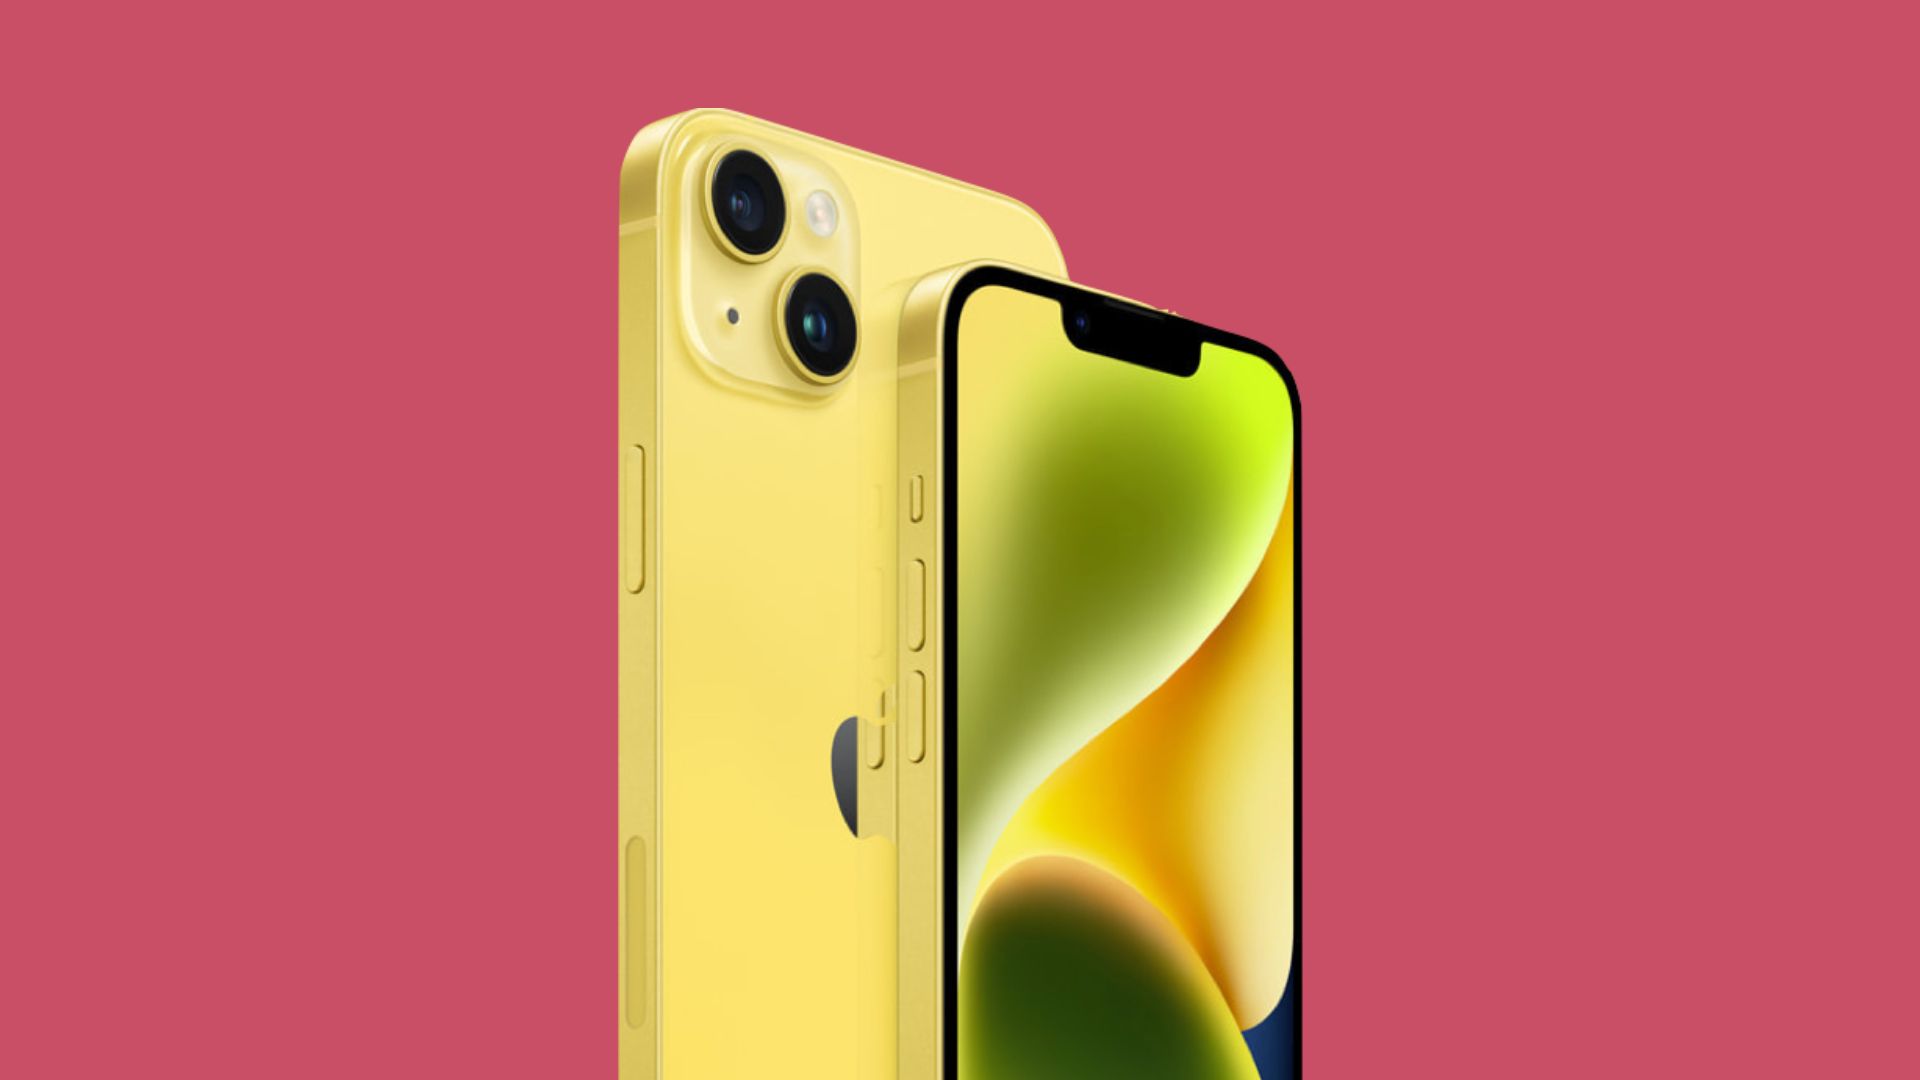 The new yellow iPhone from Apple is incredibly, uhh, yellow